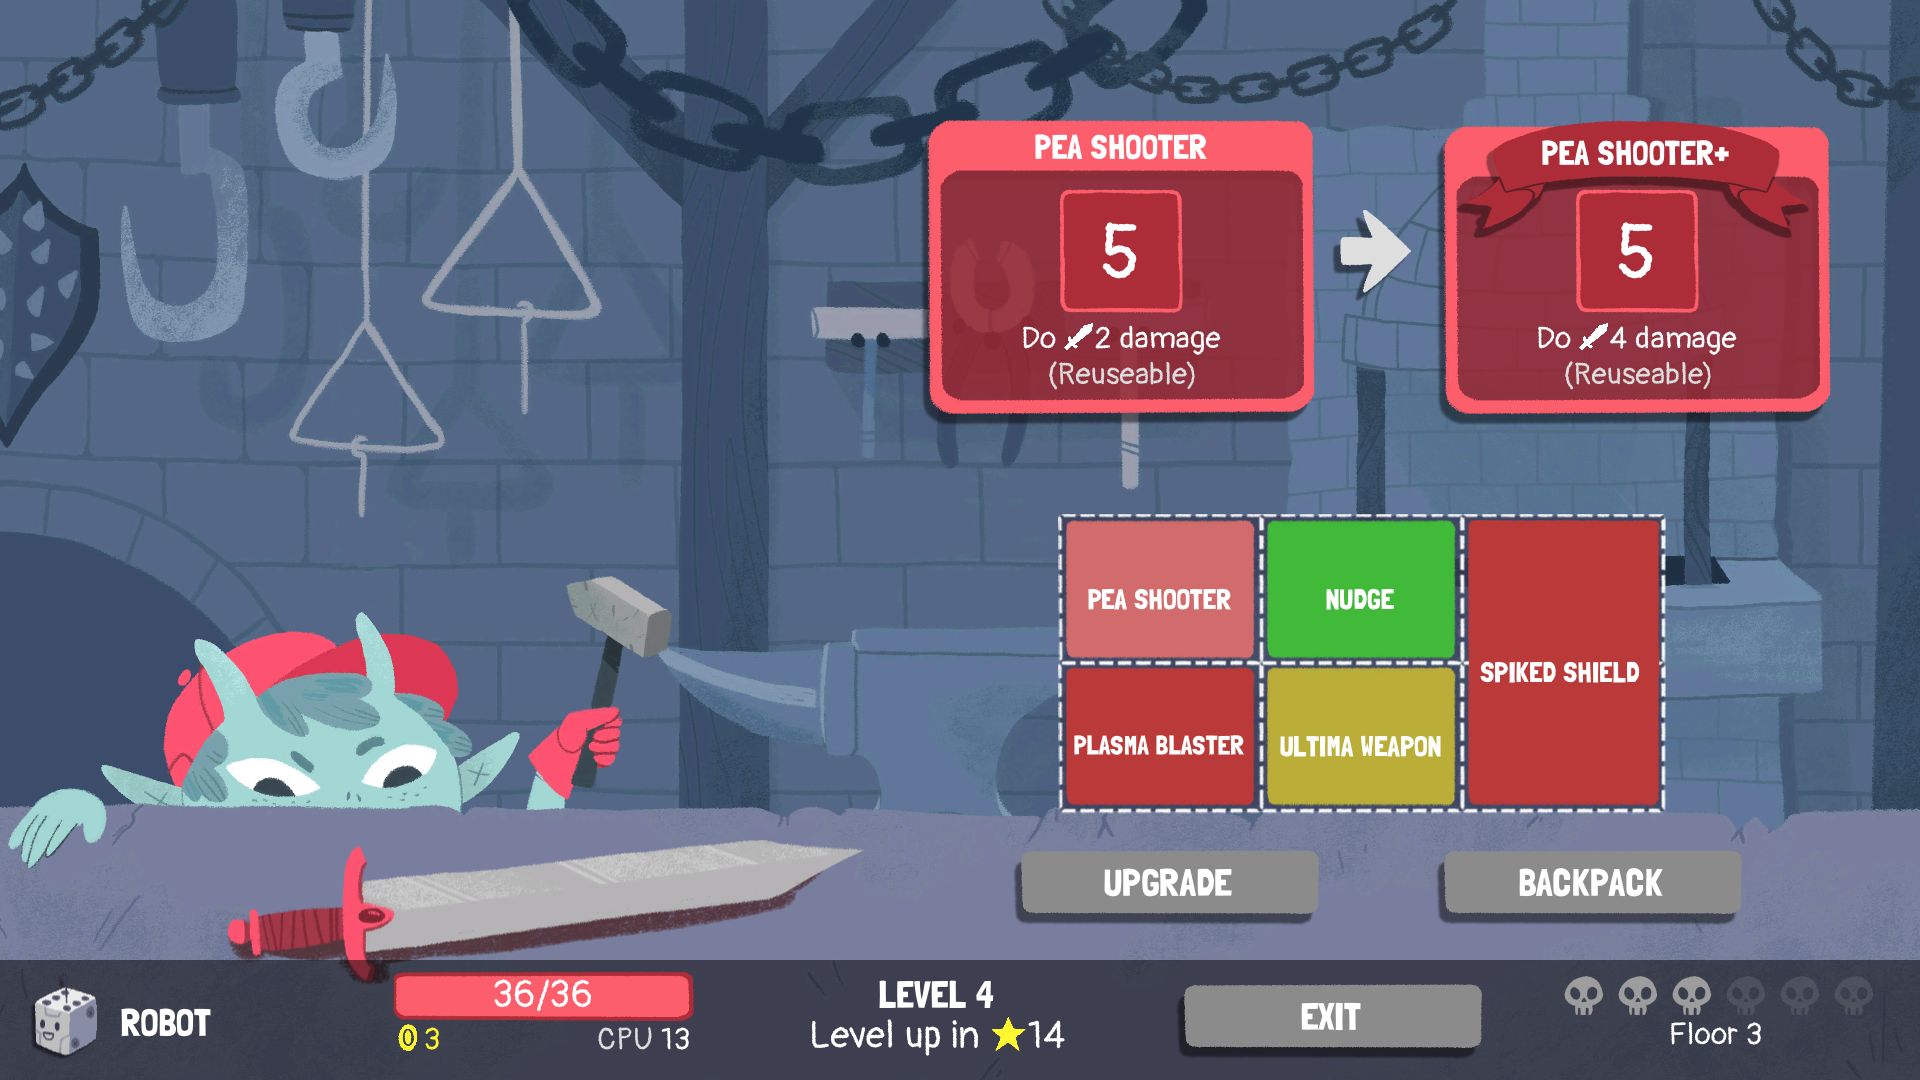 Dicey Dungeons for Android